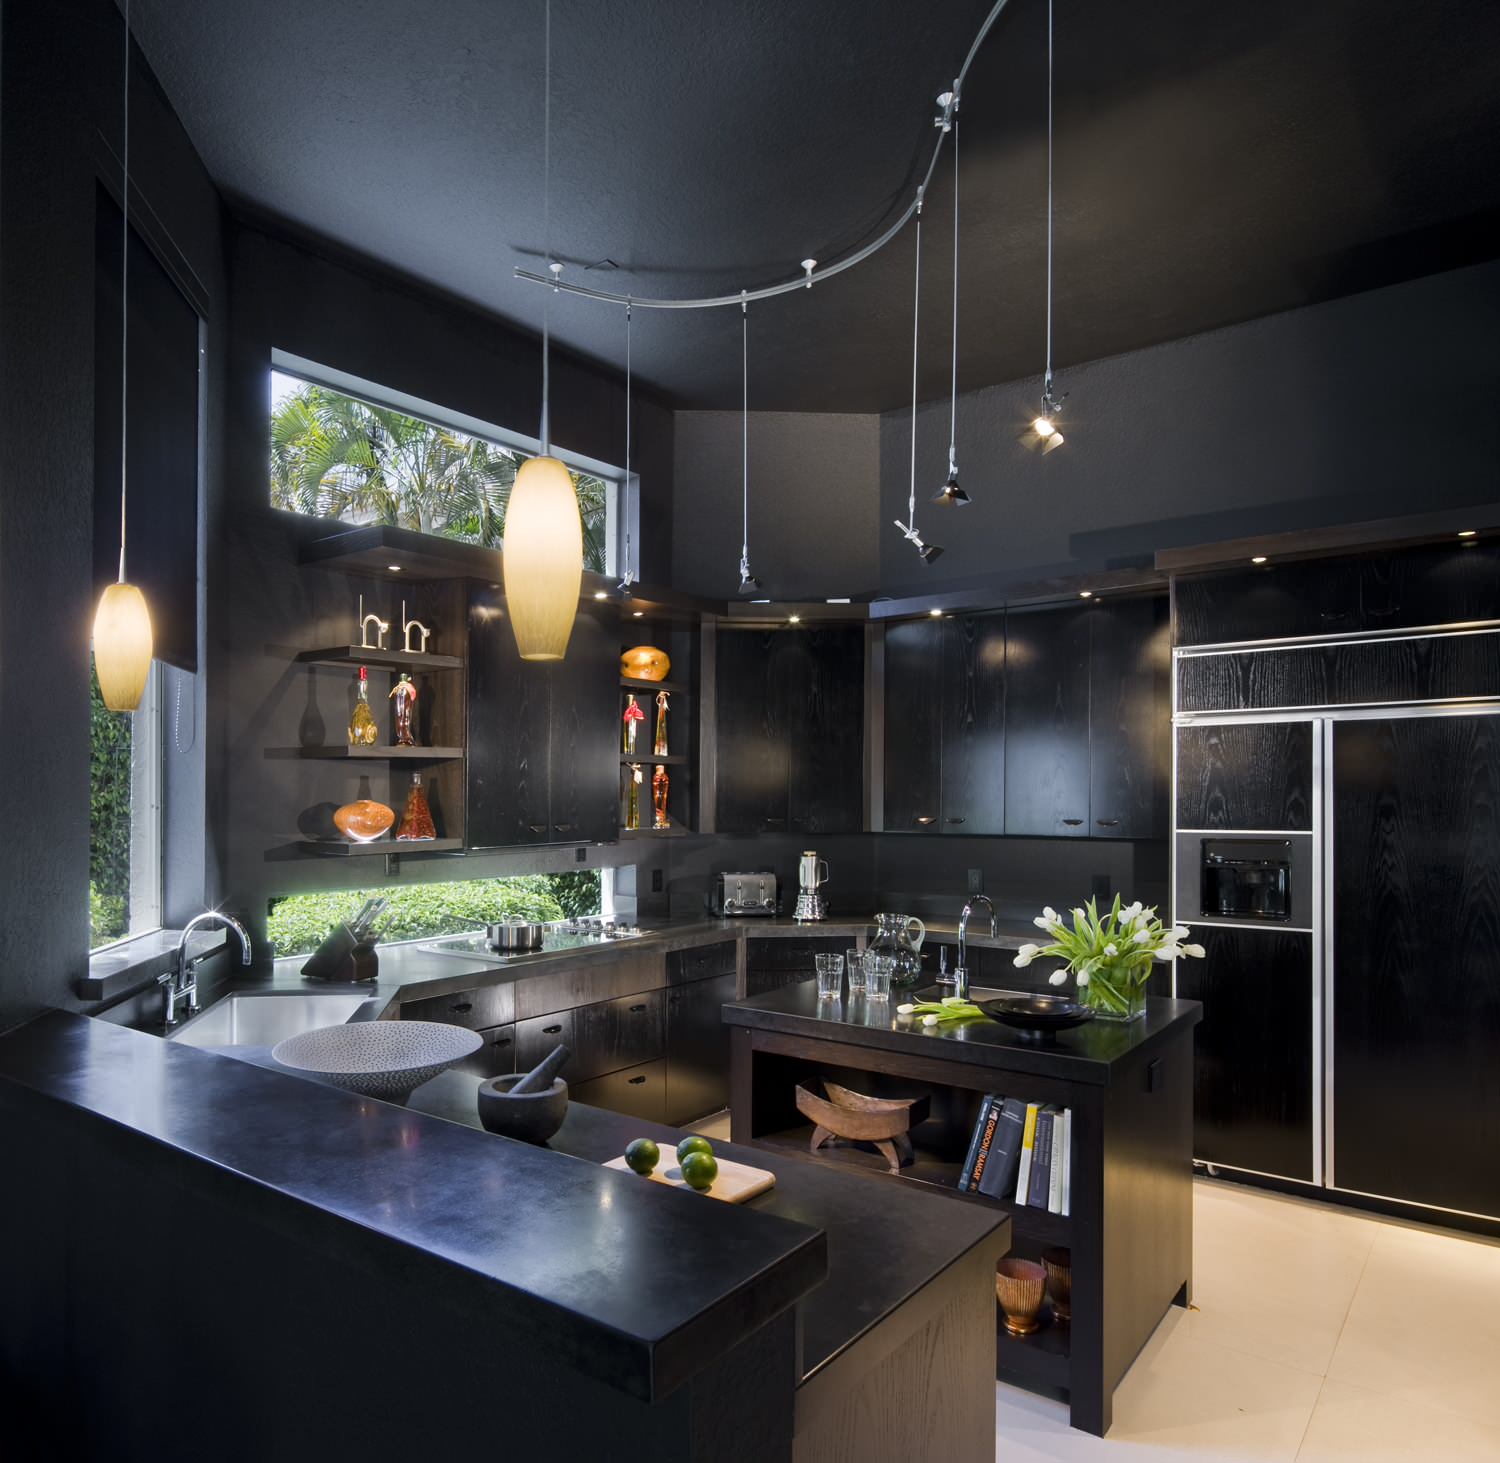 The black for spacious and elegant kitchens